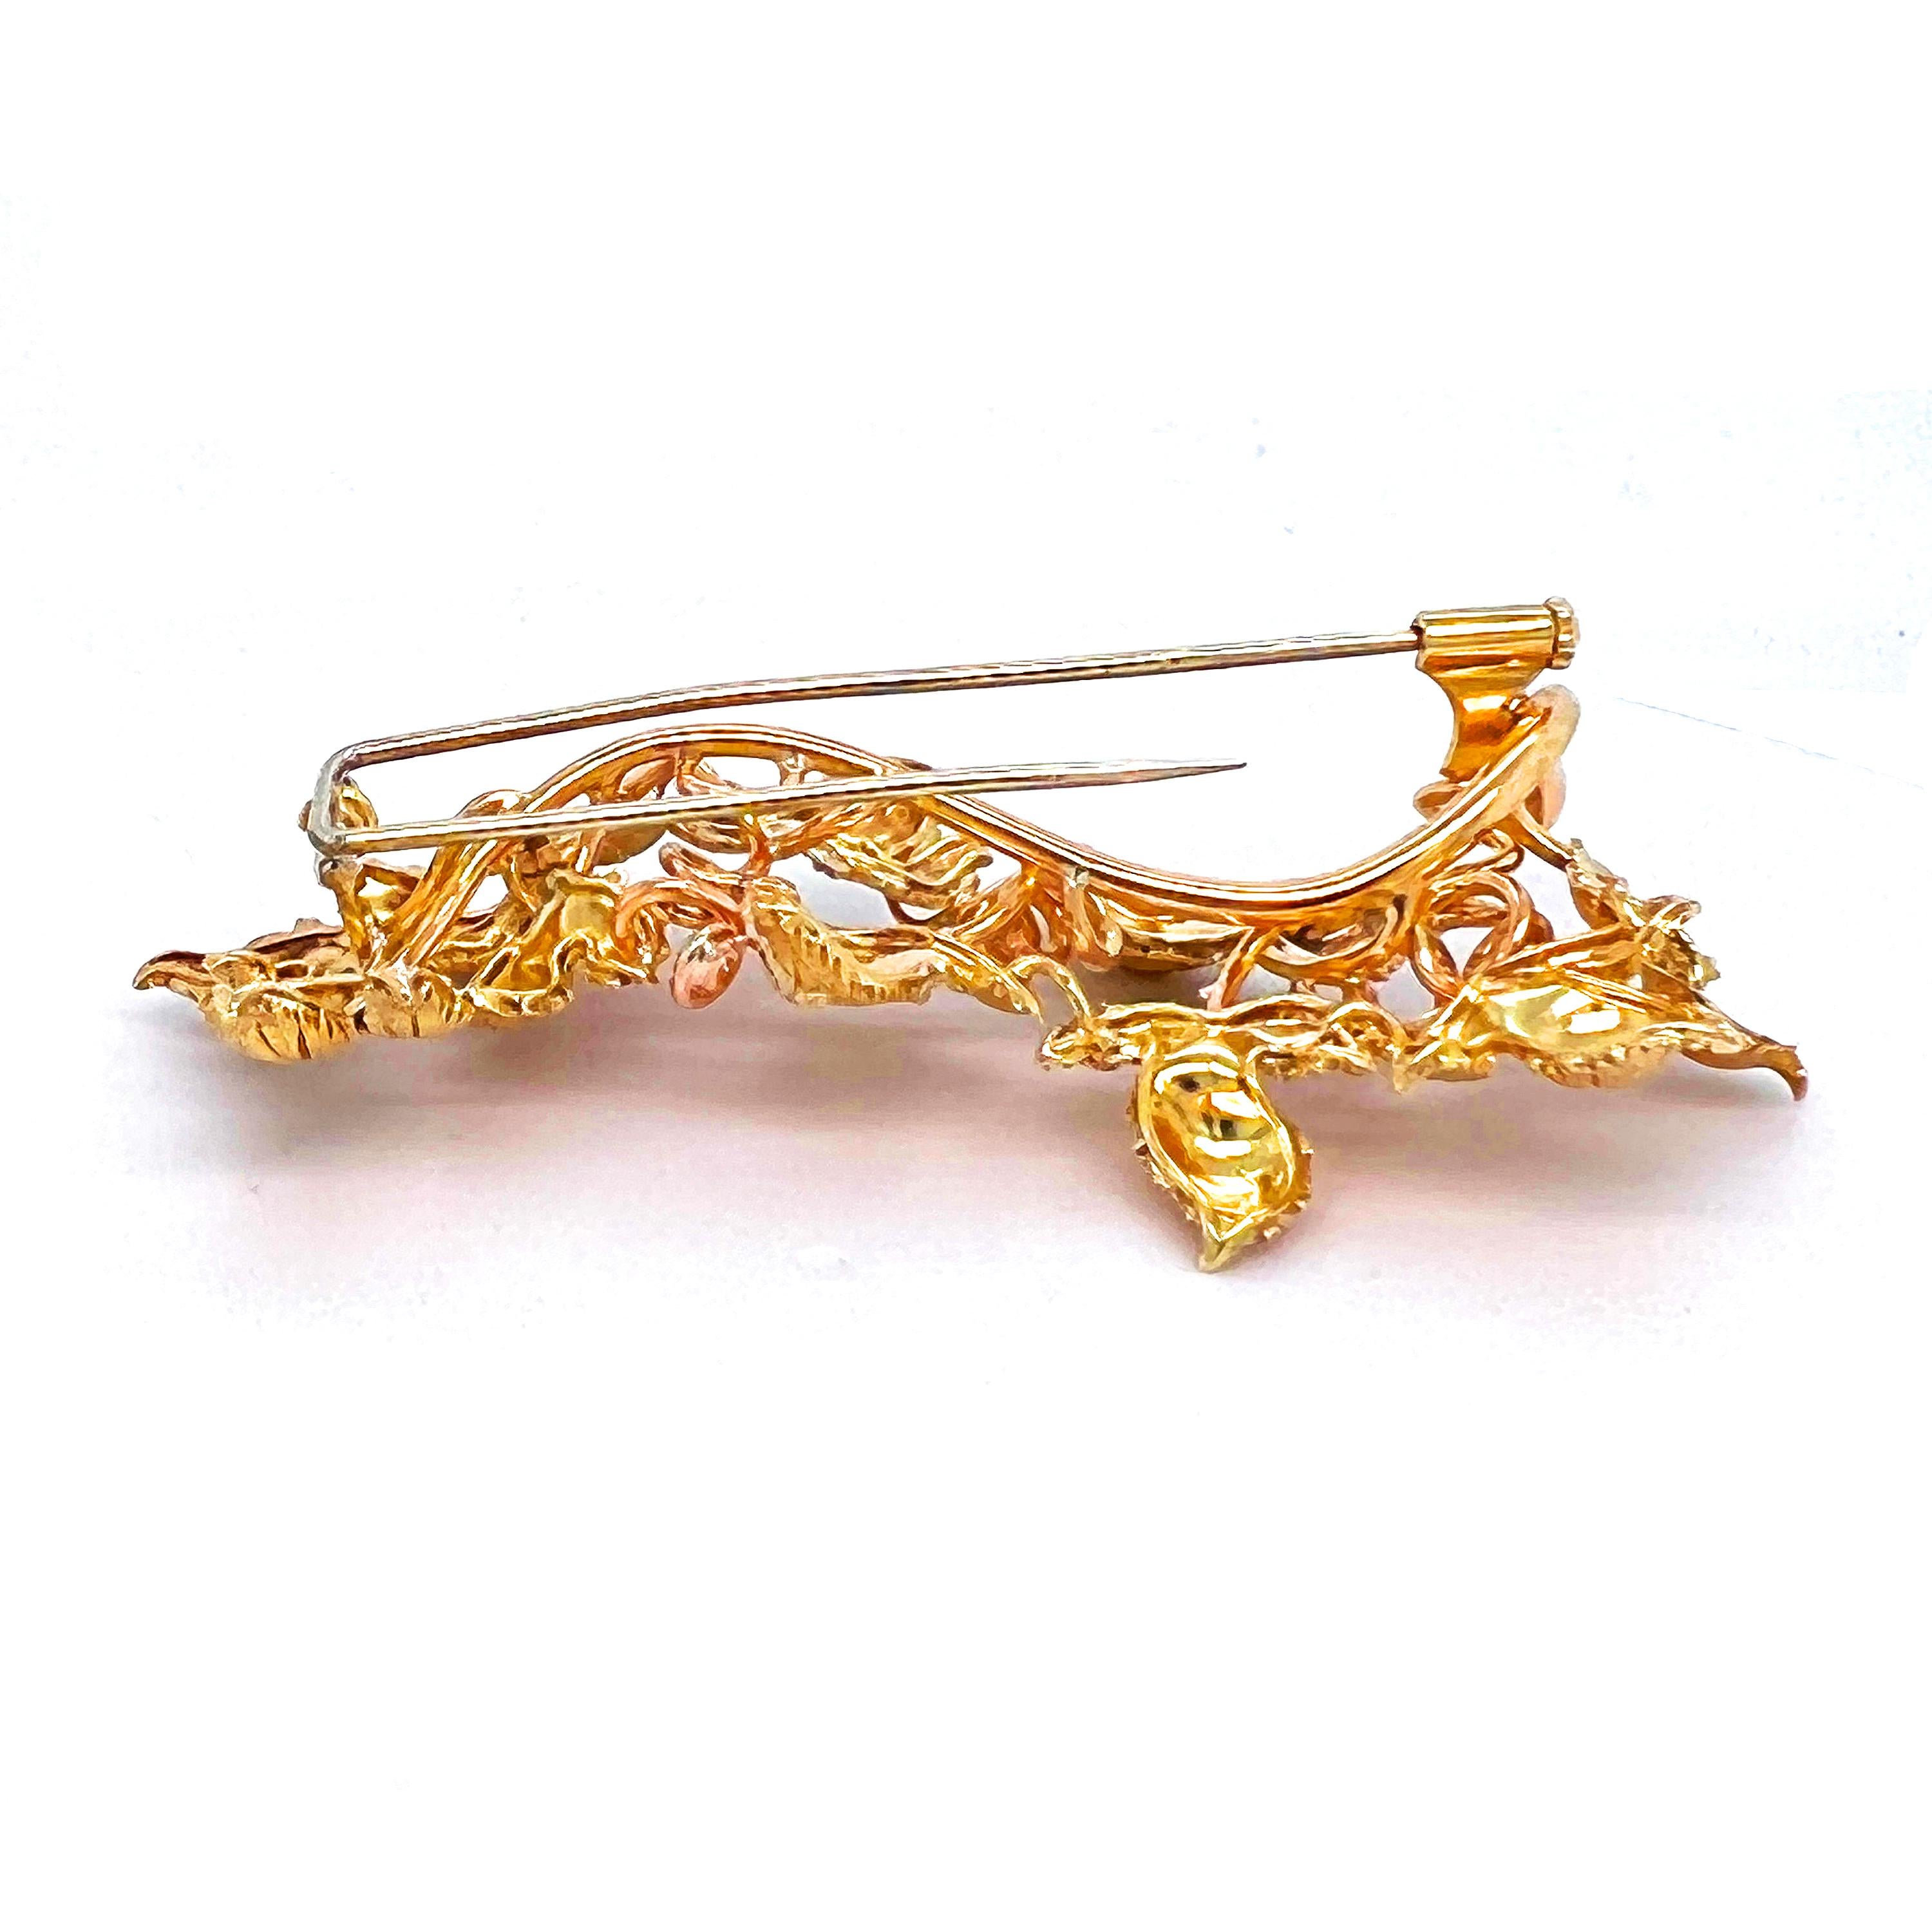 18 Karat Yellow Gold Grape Vine Floral Motif Brooch Pin Matte Finish

Solid 18k gold with incredible detail on each of the maple tree leaves. The finishing is a brushed-matte finish. 

Brooch measures just about 2.70 inches in length. 